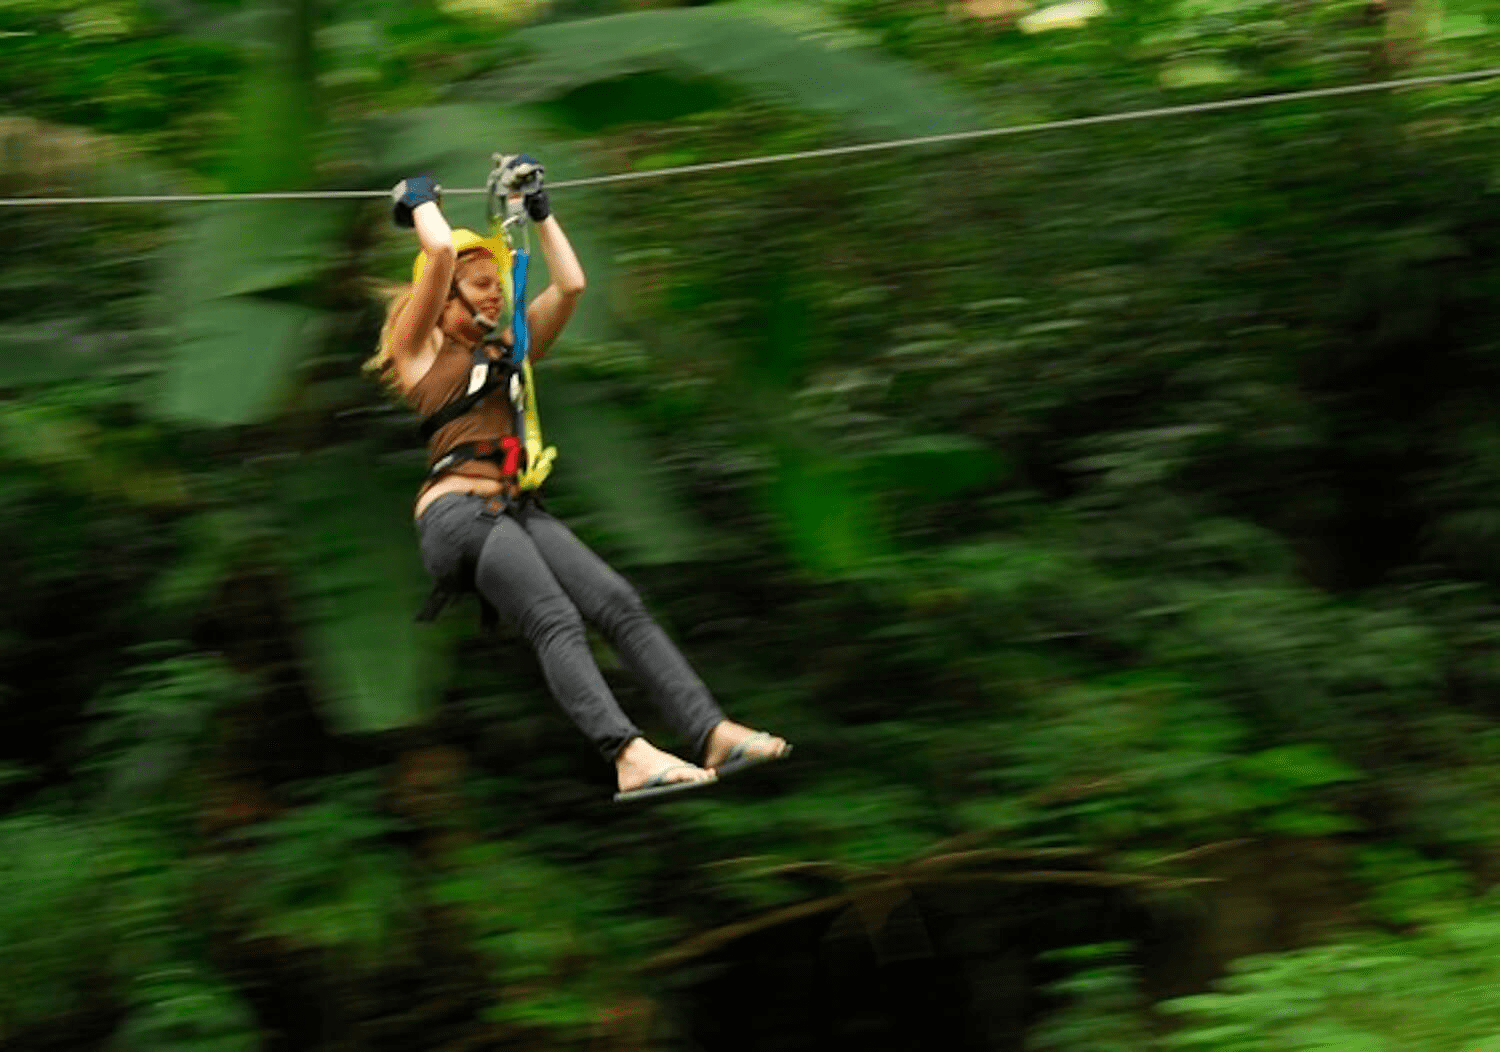 wow extreme activities on the zipline.  wow extreme activities.